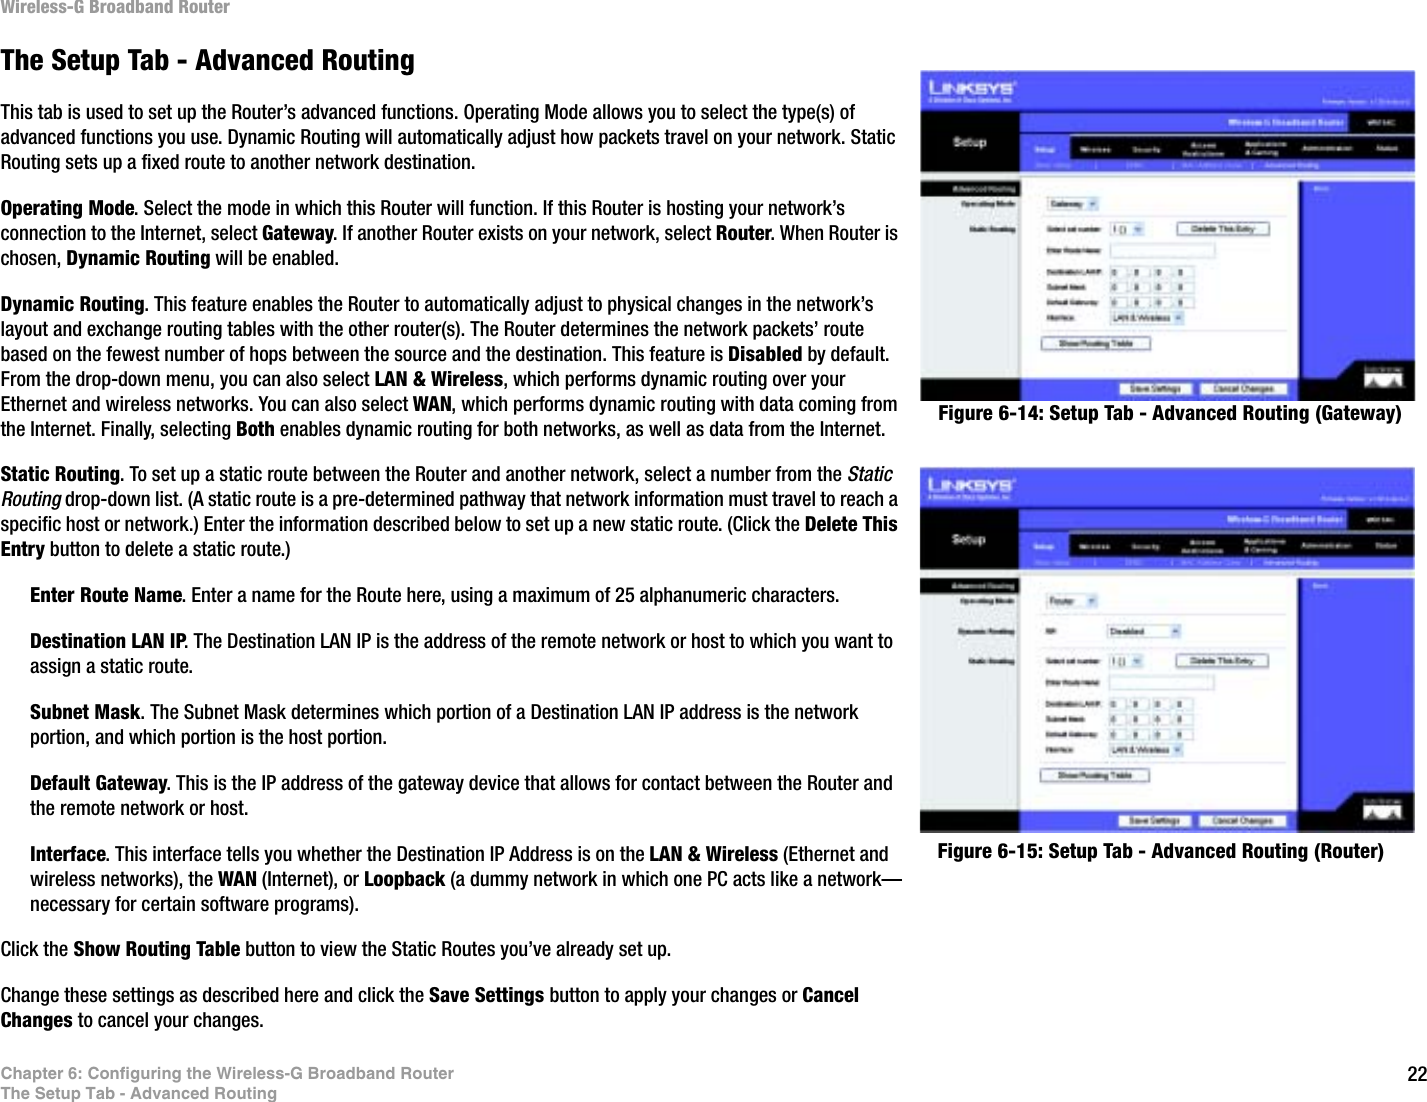 22Chapter 6: Configuring the Wireless-G Broadband RouterThe Setup Tab - Advanced RoutingWireless-G Broadband RouterThe Setup Tab - Advanced RoutingThis tab is used to set up the Router’s advanced functions. Operating Mode allows you to select the type(s) of advanced functions you use. Dynamic Routing will automatically adjust how packets travel on your network. Static Routing sets up a fixed route to another network destination.Operating Mode. Select the mode in which this Router will function. If this Router is hosting your network’s connection to the Internet, select Gateway. If another Router exists on your network, select Router. When Router is chosen, Dynamic Routing will be enabled.Dynamic Routing. This feature enables the Router to automatically adjust to physical changes in the network’s layout and exchange routing tables with the other router(s). The Router determines the network packets’ route based on the fewest number of hops between the source and the destination. This feature is Disabled by default. From the drop-down menu, you can also select LAN &amp; Wireless, which performs dynamic routing over your Ethernet and wireless networks. You can also select WAN, which performs dynamic routing with data coming from the Internet. Finally, selecting Both enables dynamic routing for both networks, as well as data from the Internet.Static Routing. To set up a static route between the Router and another network, select a number from the Static Routing drop-down list. (A static route is a pre-determined pathway that network information must travel to reach a specific host or network.) Enter the information described below to set up a new static route. (Click the Delete This Entry button to delete a static route.)Enter Route Name. Enter a name for the Route here, using a maximum of 25 alphanumeric characters.Destination LAN IP. The Destination LAN IP is the address of the remote network or host to which you want to assign a static route.Subnet Mask. The Subnet Mask determines which portion of a Destination LAN IP address is the network portion, and which portion is the host portion. Default Gateway. This is the IP address of the gateway device that allows for contact between the Router and the remote network or host.Interface. This interface tells you whether the Destination IP Address is on the LAN &amp; Wireless (Ethernet and wireless networks), the WAN (Internet), or Loopback (a dummy network in which one PC acts like a network—necessary for certain software programs). Click the Show Routing Table button to view the Static Routes you’ve already set up.Change these settings as described here and click the Save Settings button to apply your changes or Cancel Changes to cancel your changes.Figure 6-14: Setup Tab - Advanced Routing (Gateway)Figure 6-15: Setup Tab - Advanced Routing (Router)